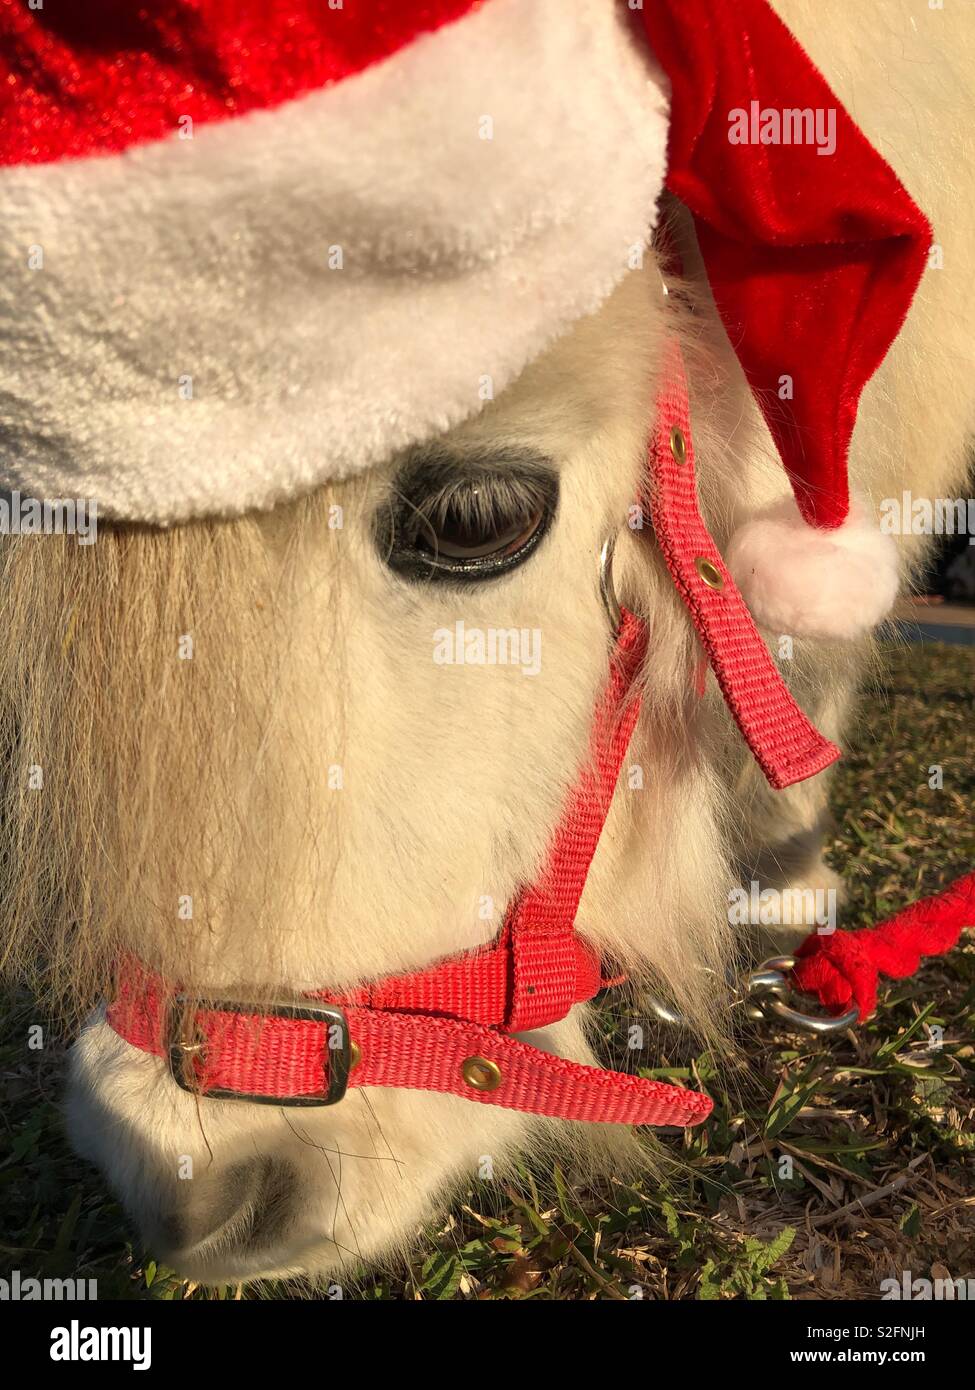 Falabella miniature horse grazing on grass and wearing a Santa Christmas hat Stock Photo